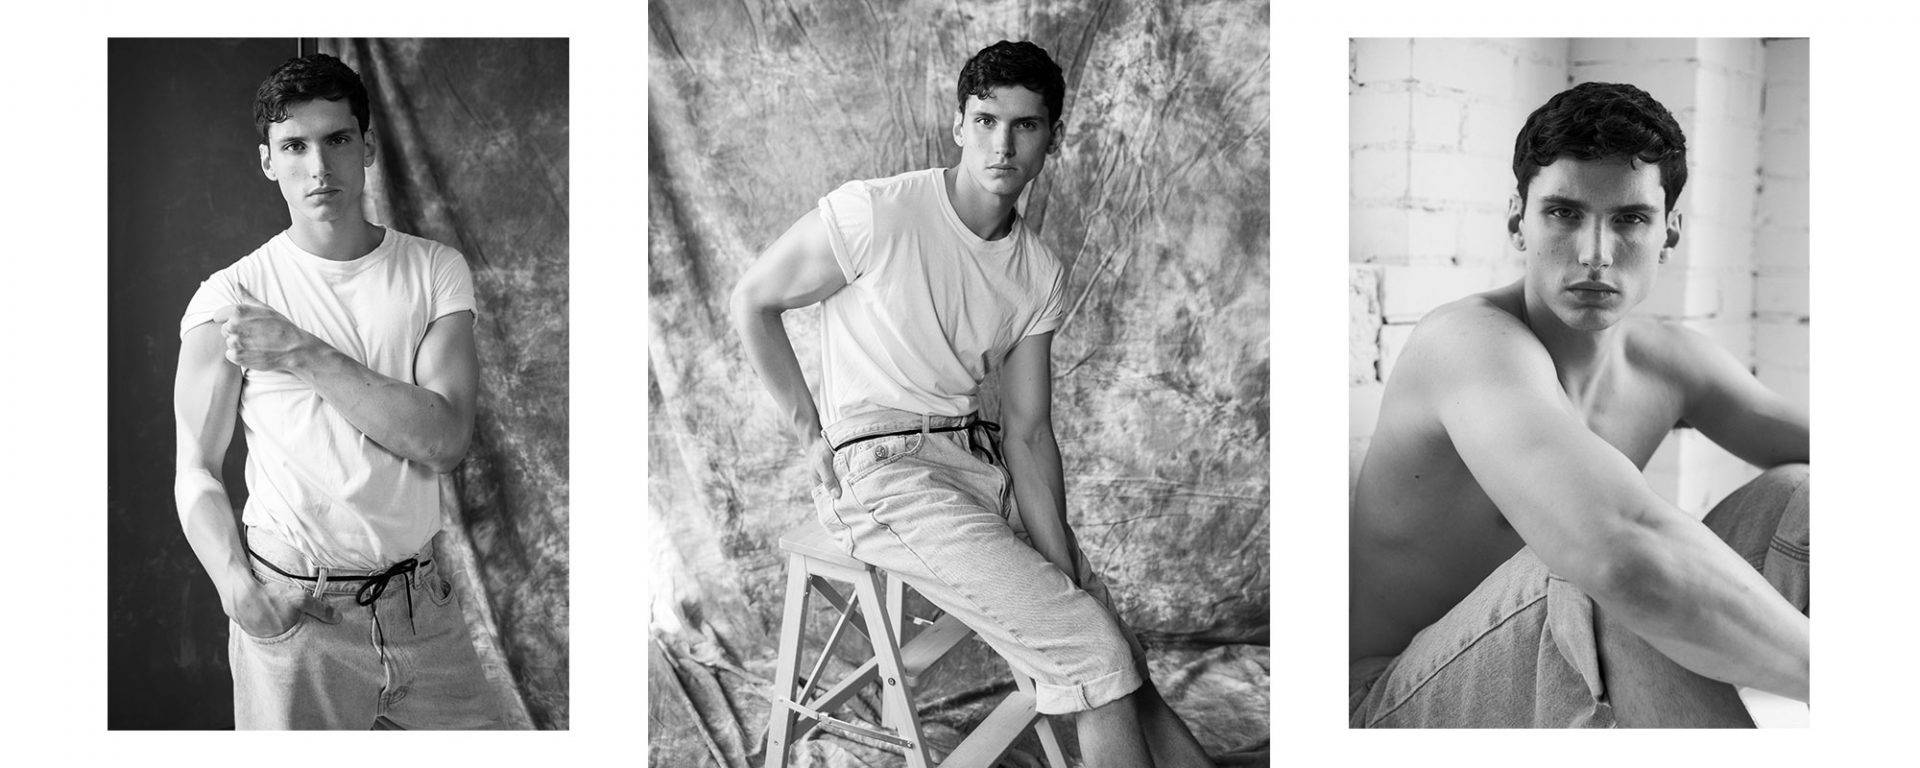 Black and white male modelling photos. Model is wearing white a t-shirt.